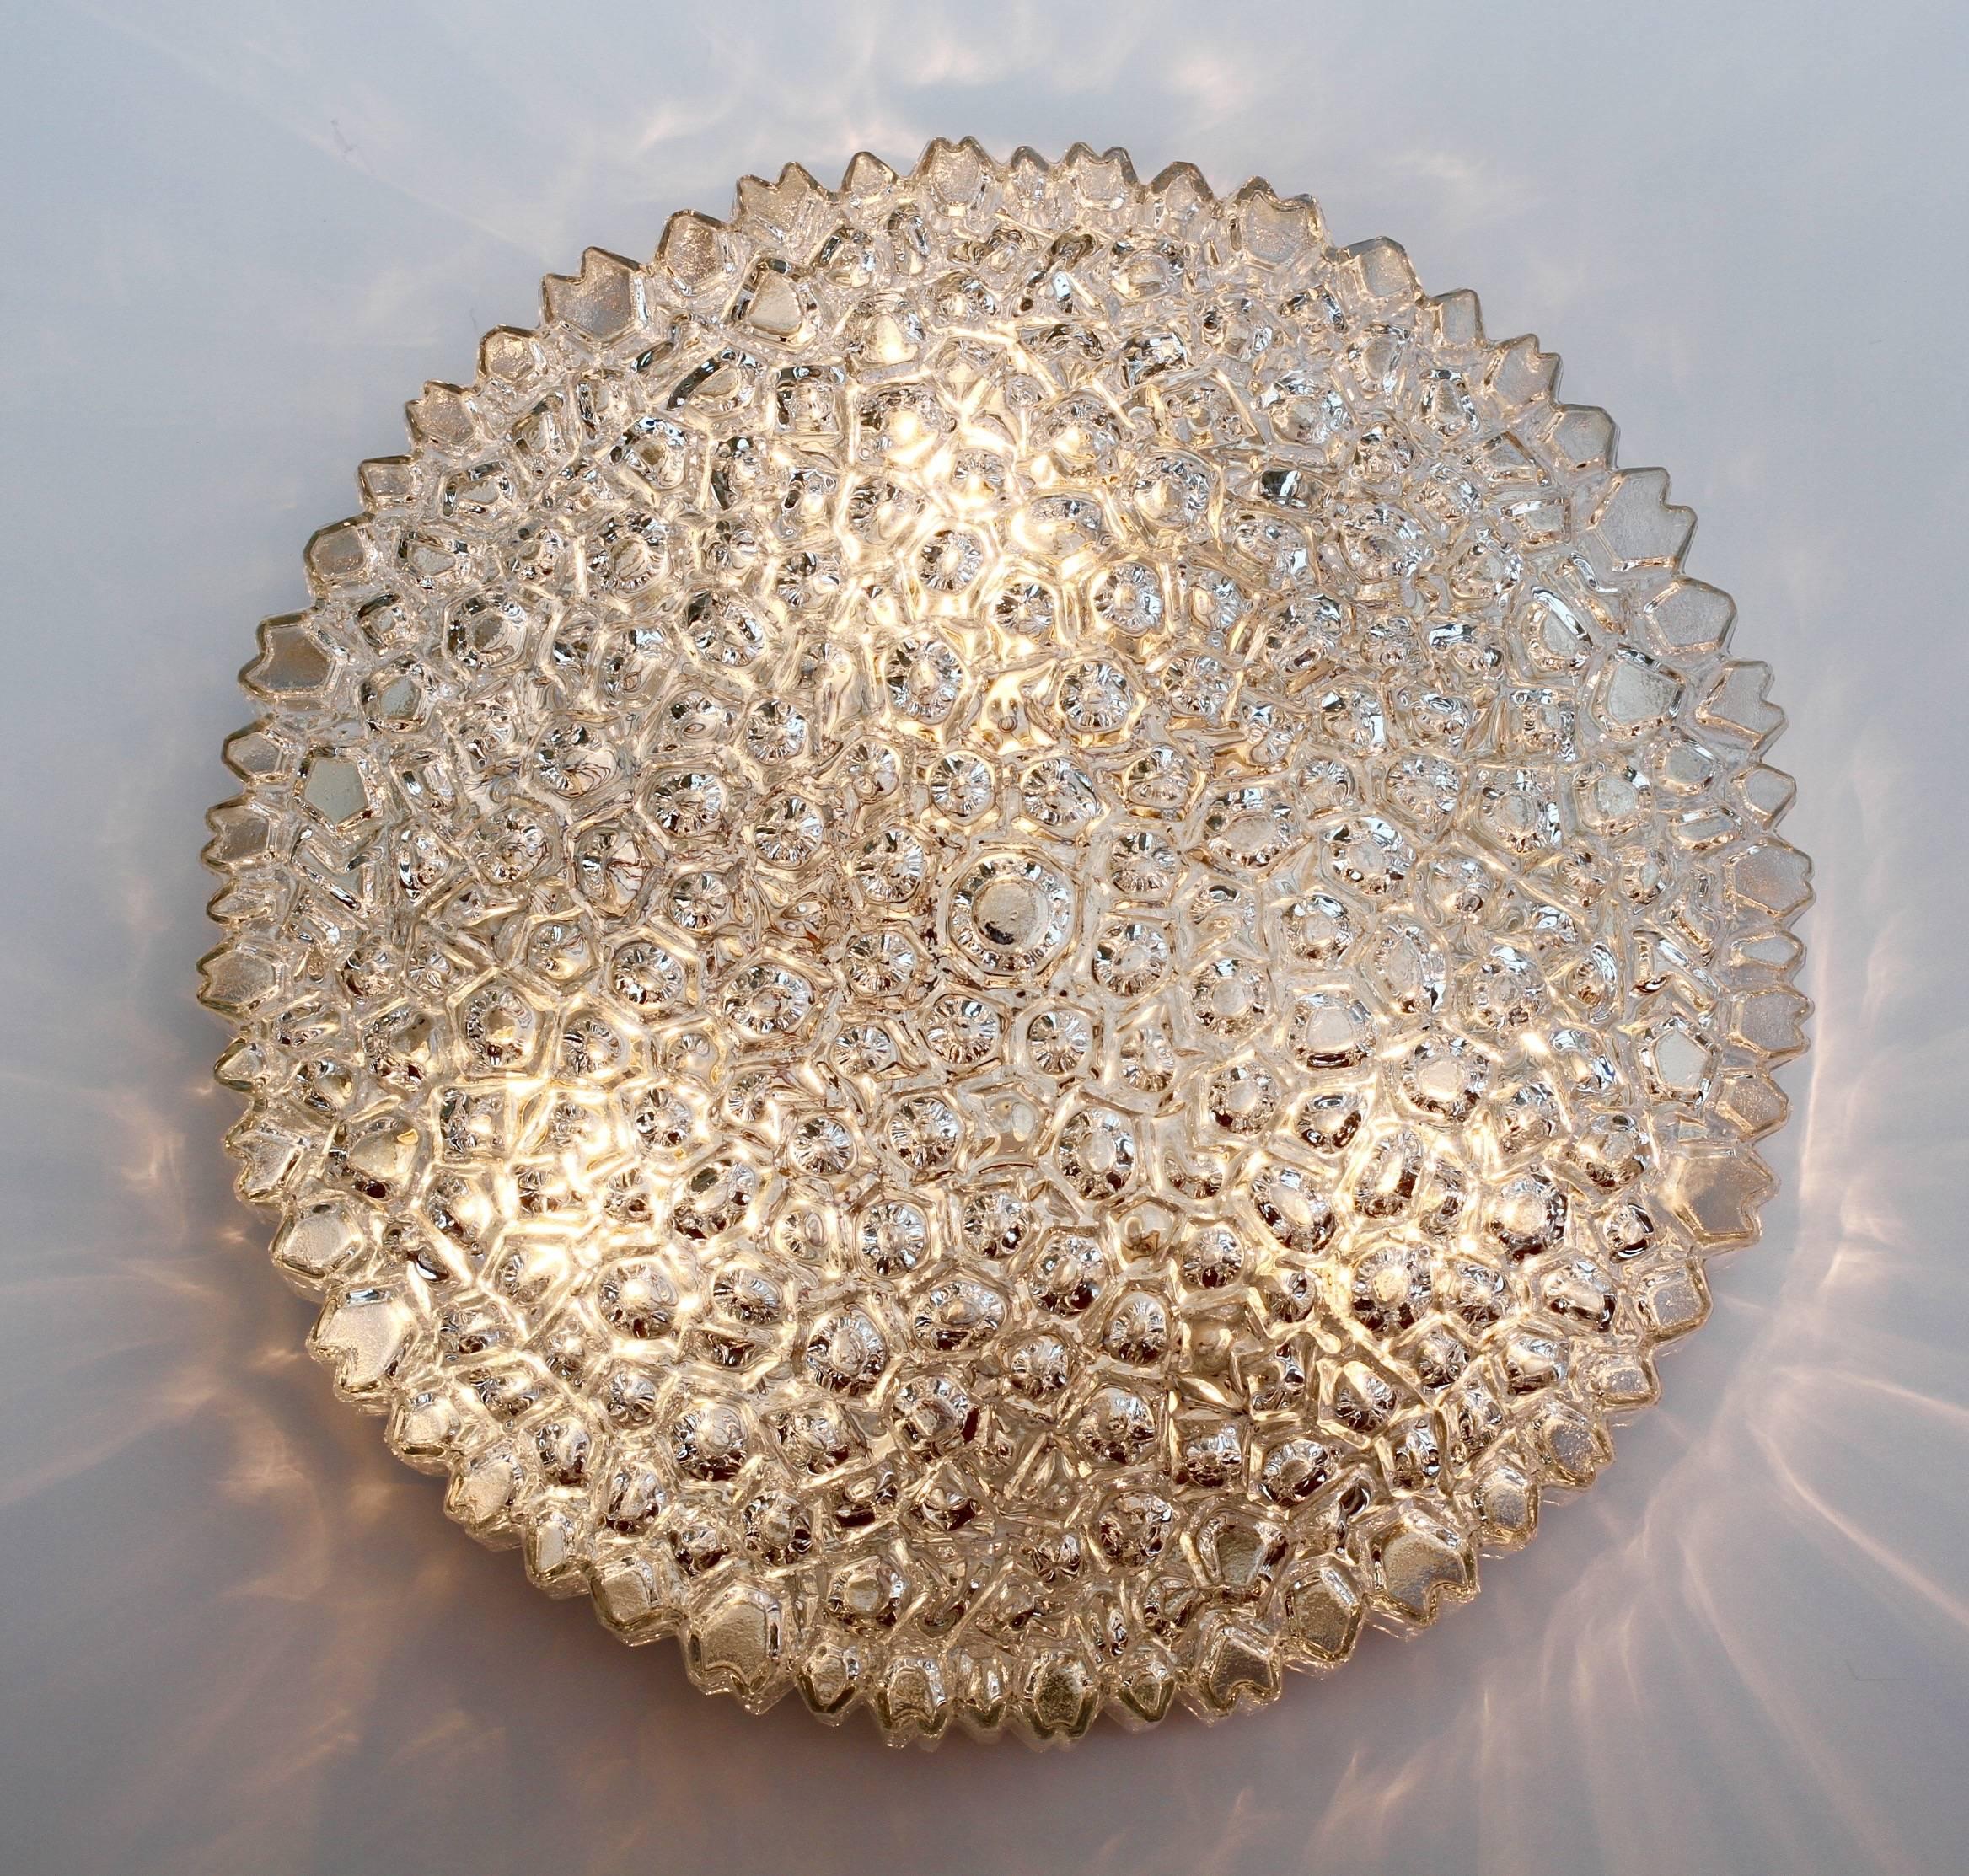 A beautiful and large 40cm (16 inch) flush mount light fixture by Glashütte Limburg, circa 1970s. Featuring a wonderful mouth blown, molded and textured clear glass shade resembling ice crystals, this midcentury vintage lamp illuminates beautifully,